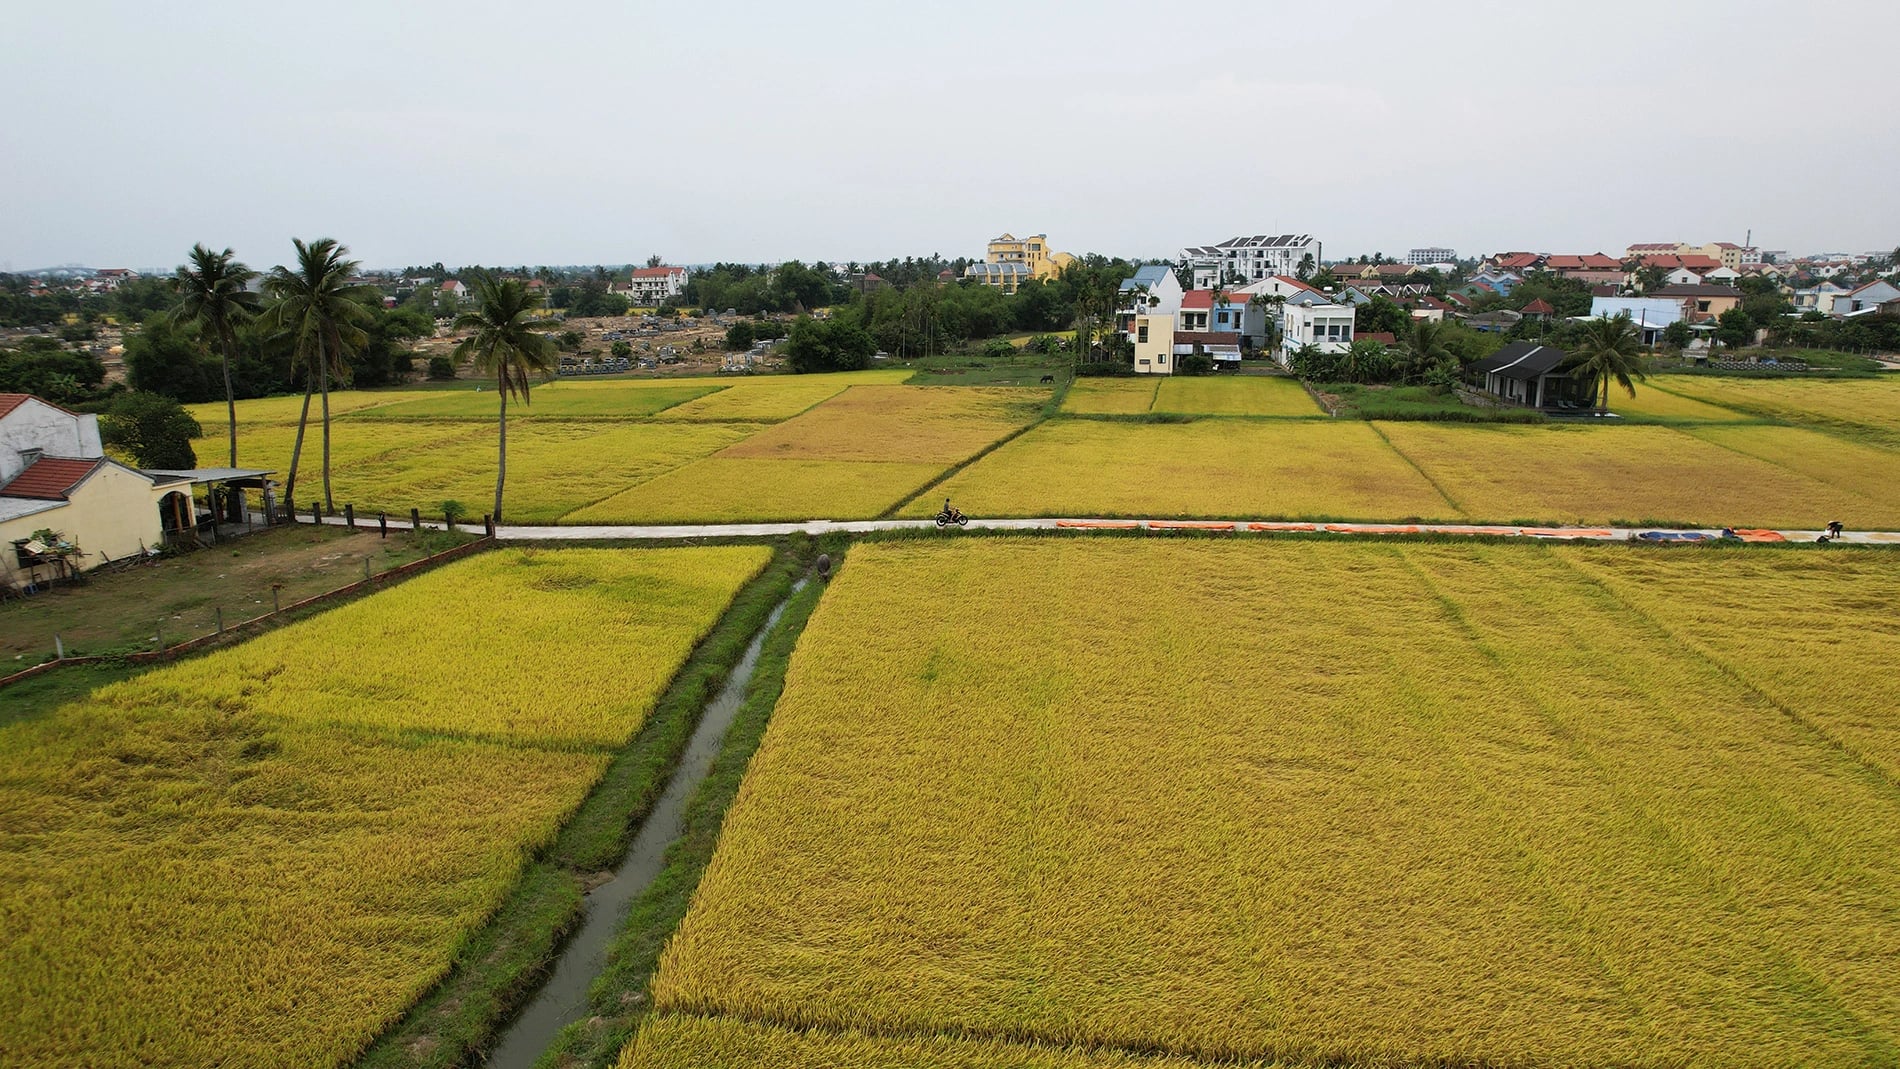 Yellow ripe paddy fields on the edge of Hoi An Ancient Town, Hoi An City, central Vietnam. Photo: Pham Van Son